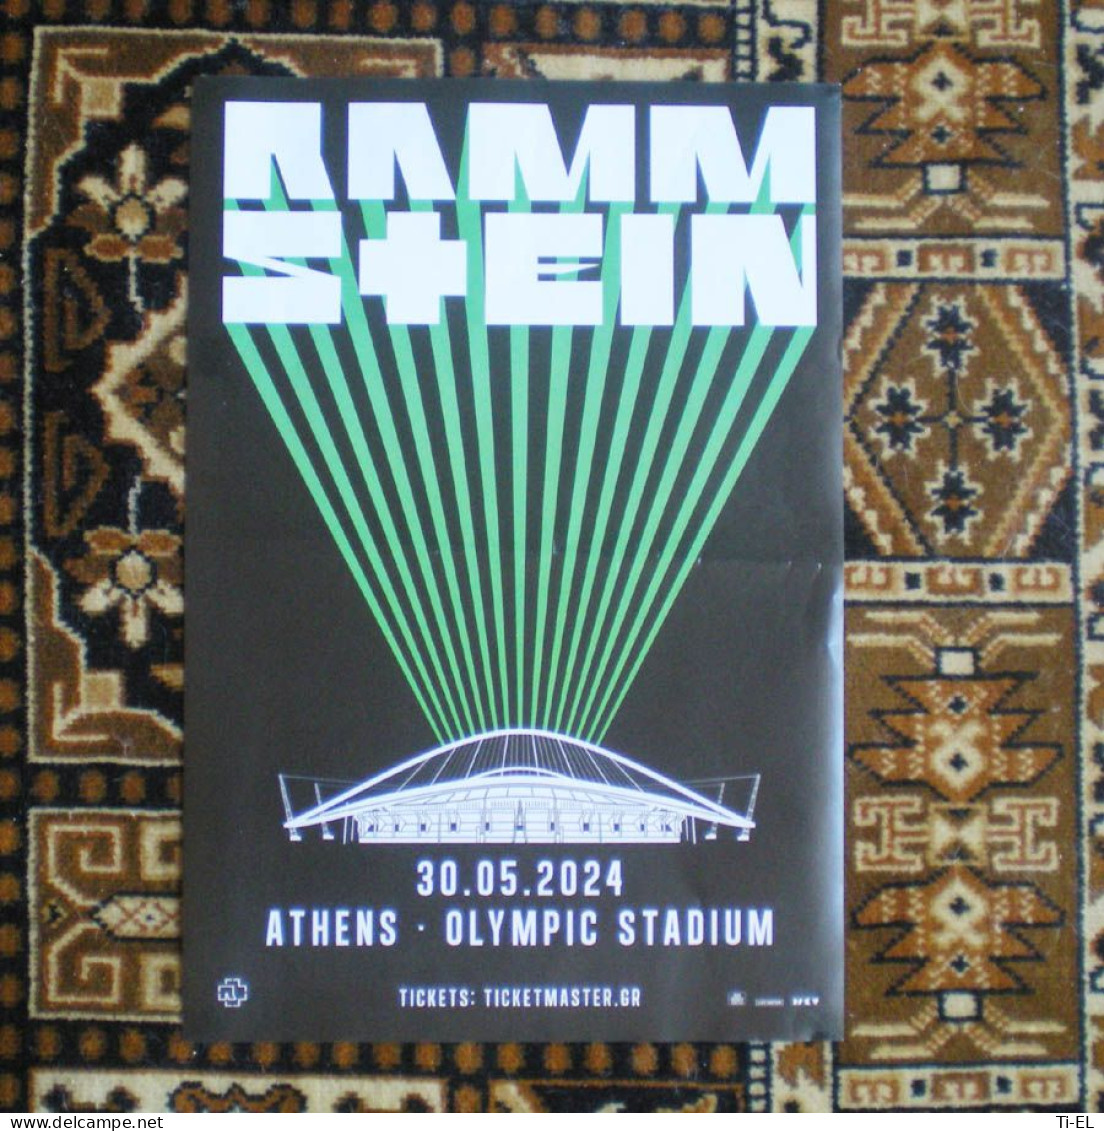 RAMMSTEIN: Original Poster (NEW EDITION) For Their Forthcoming Concert In Athens, Greece On 30.May.2024 - Posters